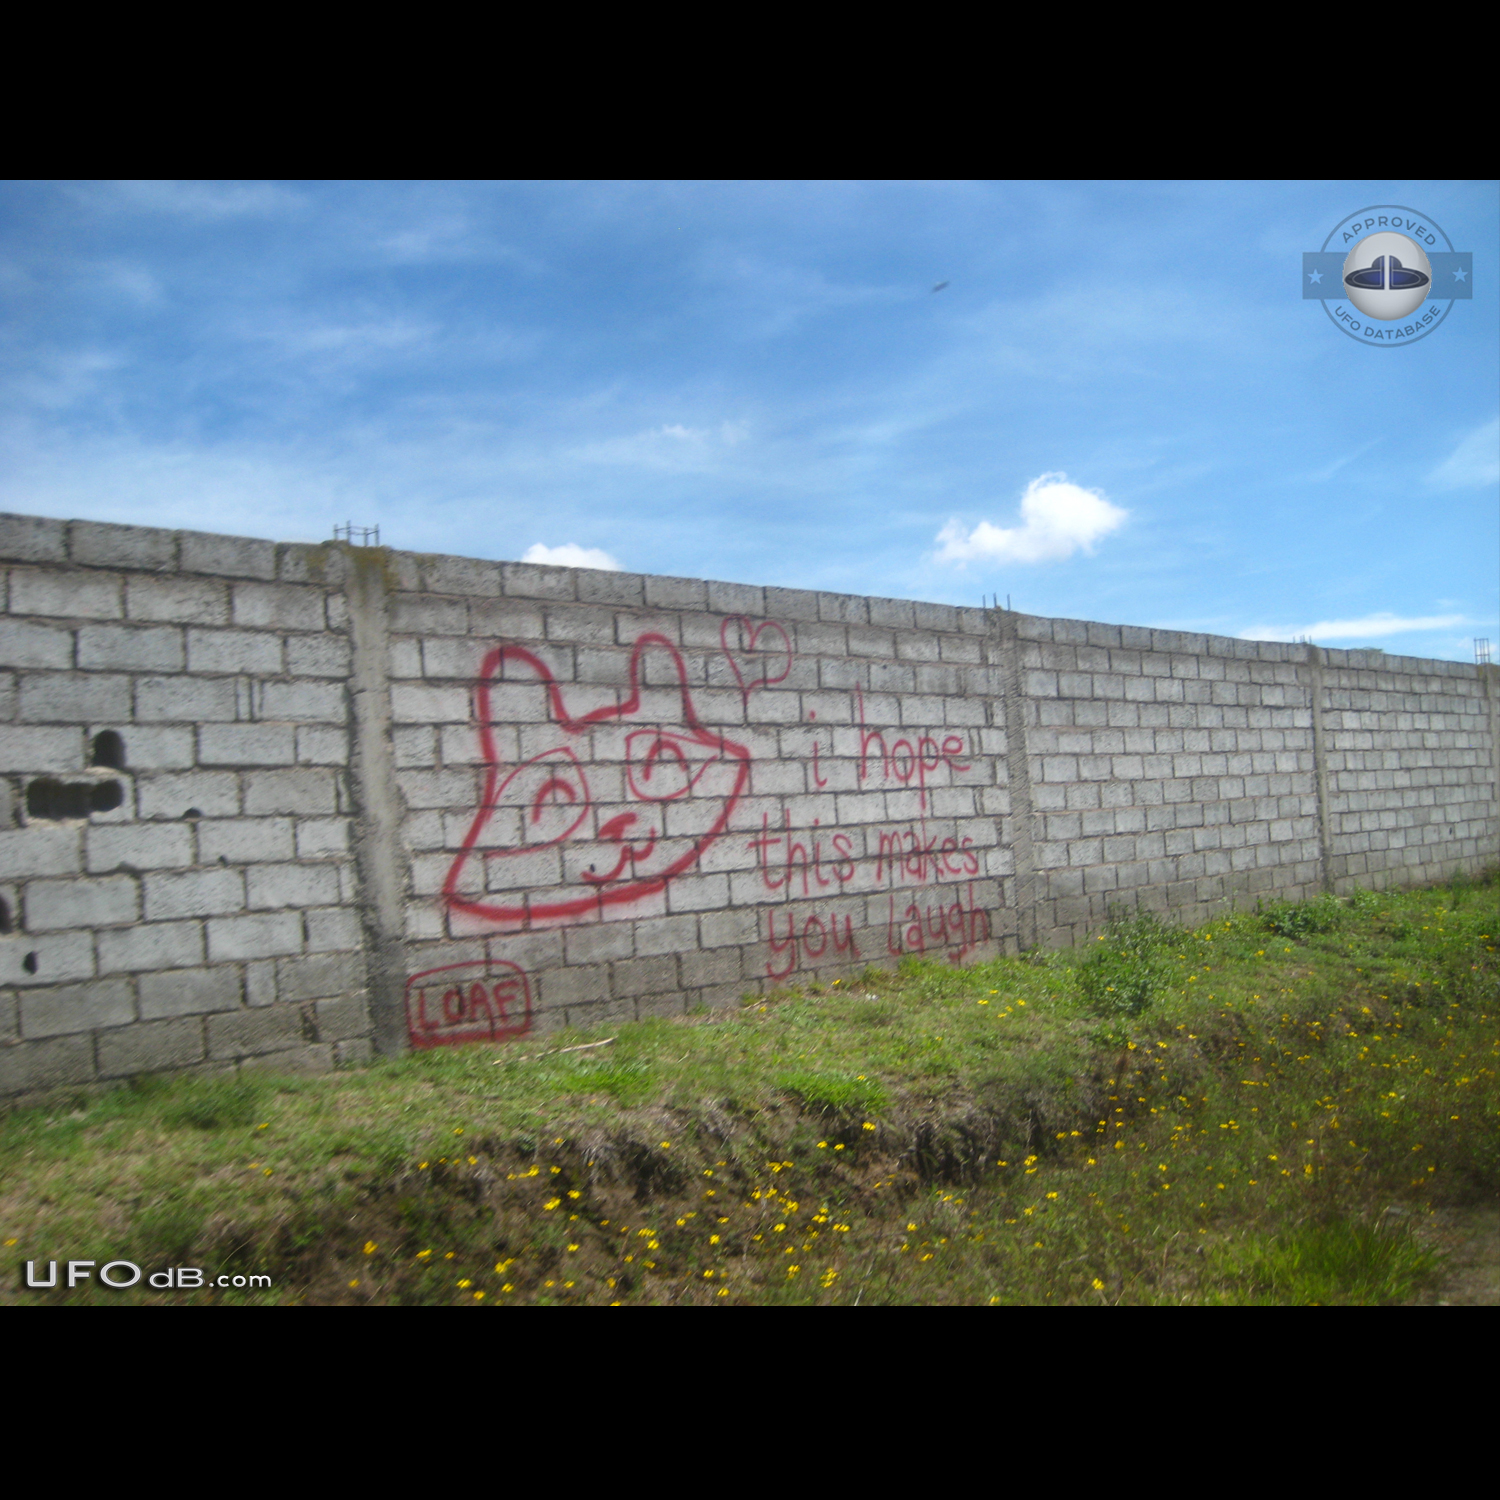 Picture of Graffiti on wall captures UFO in the sky in Cumbaya Ecuador UFO Picture #552-1